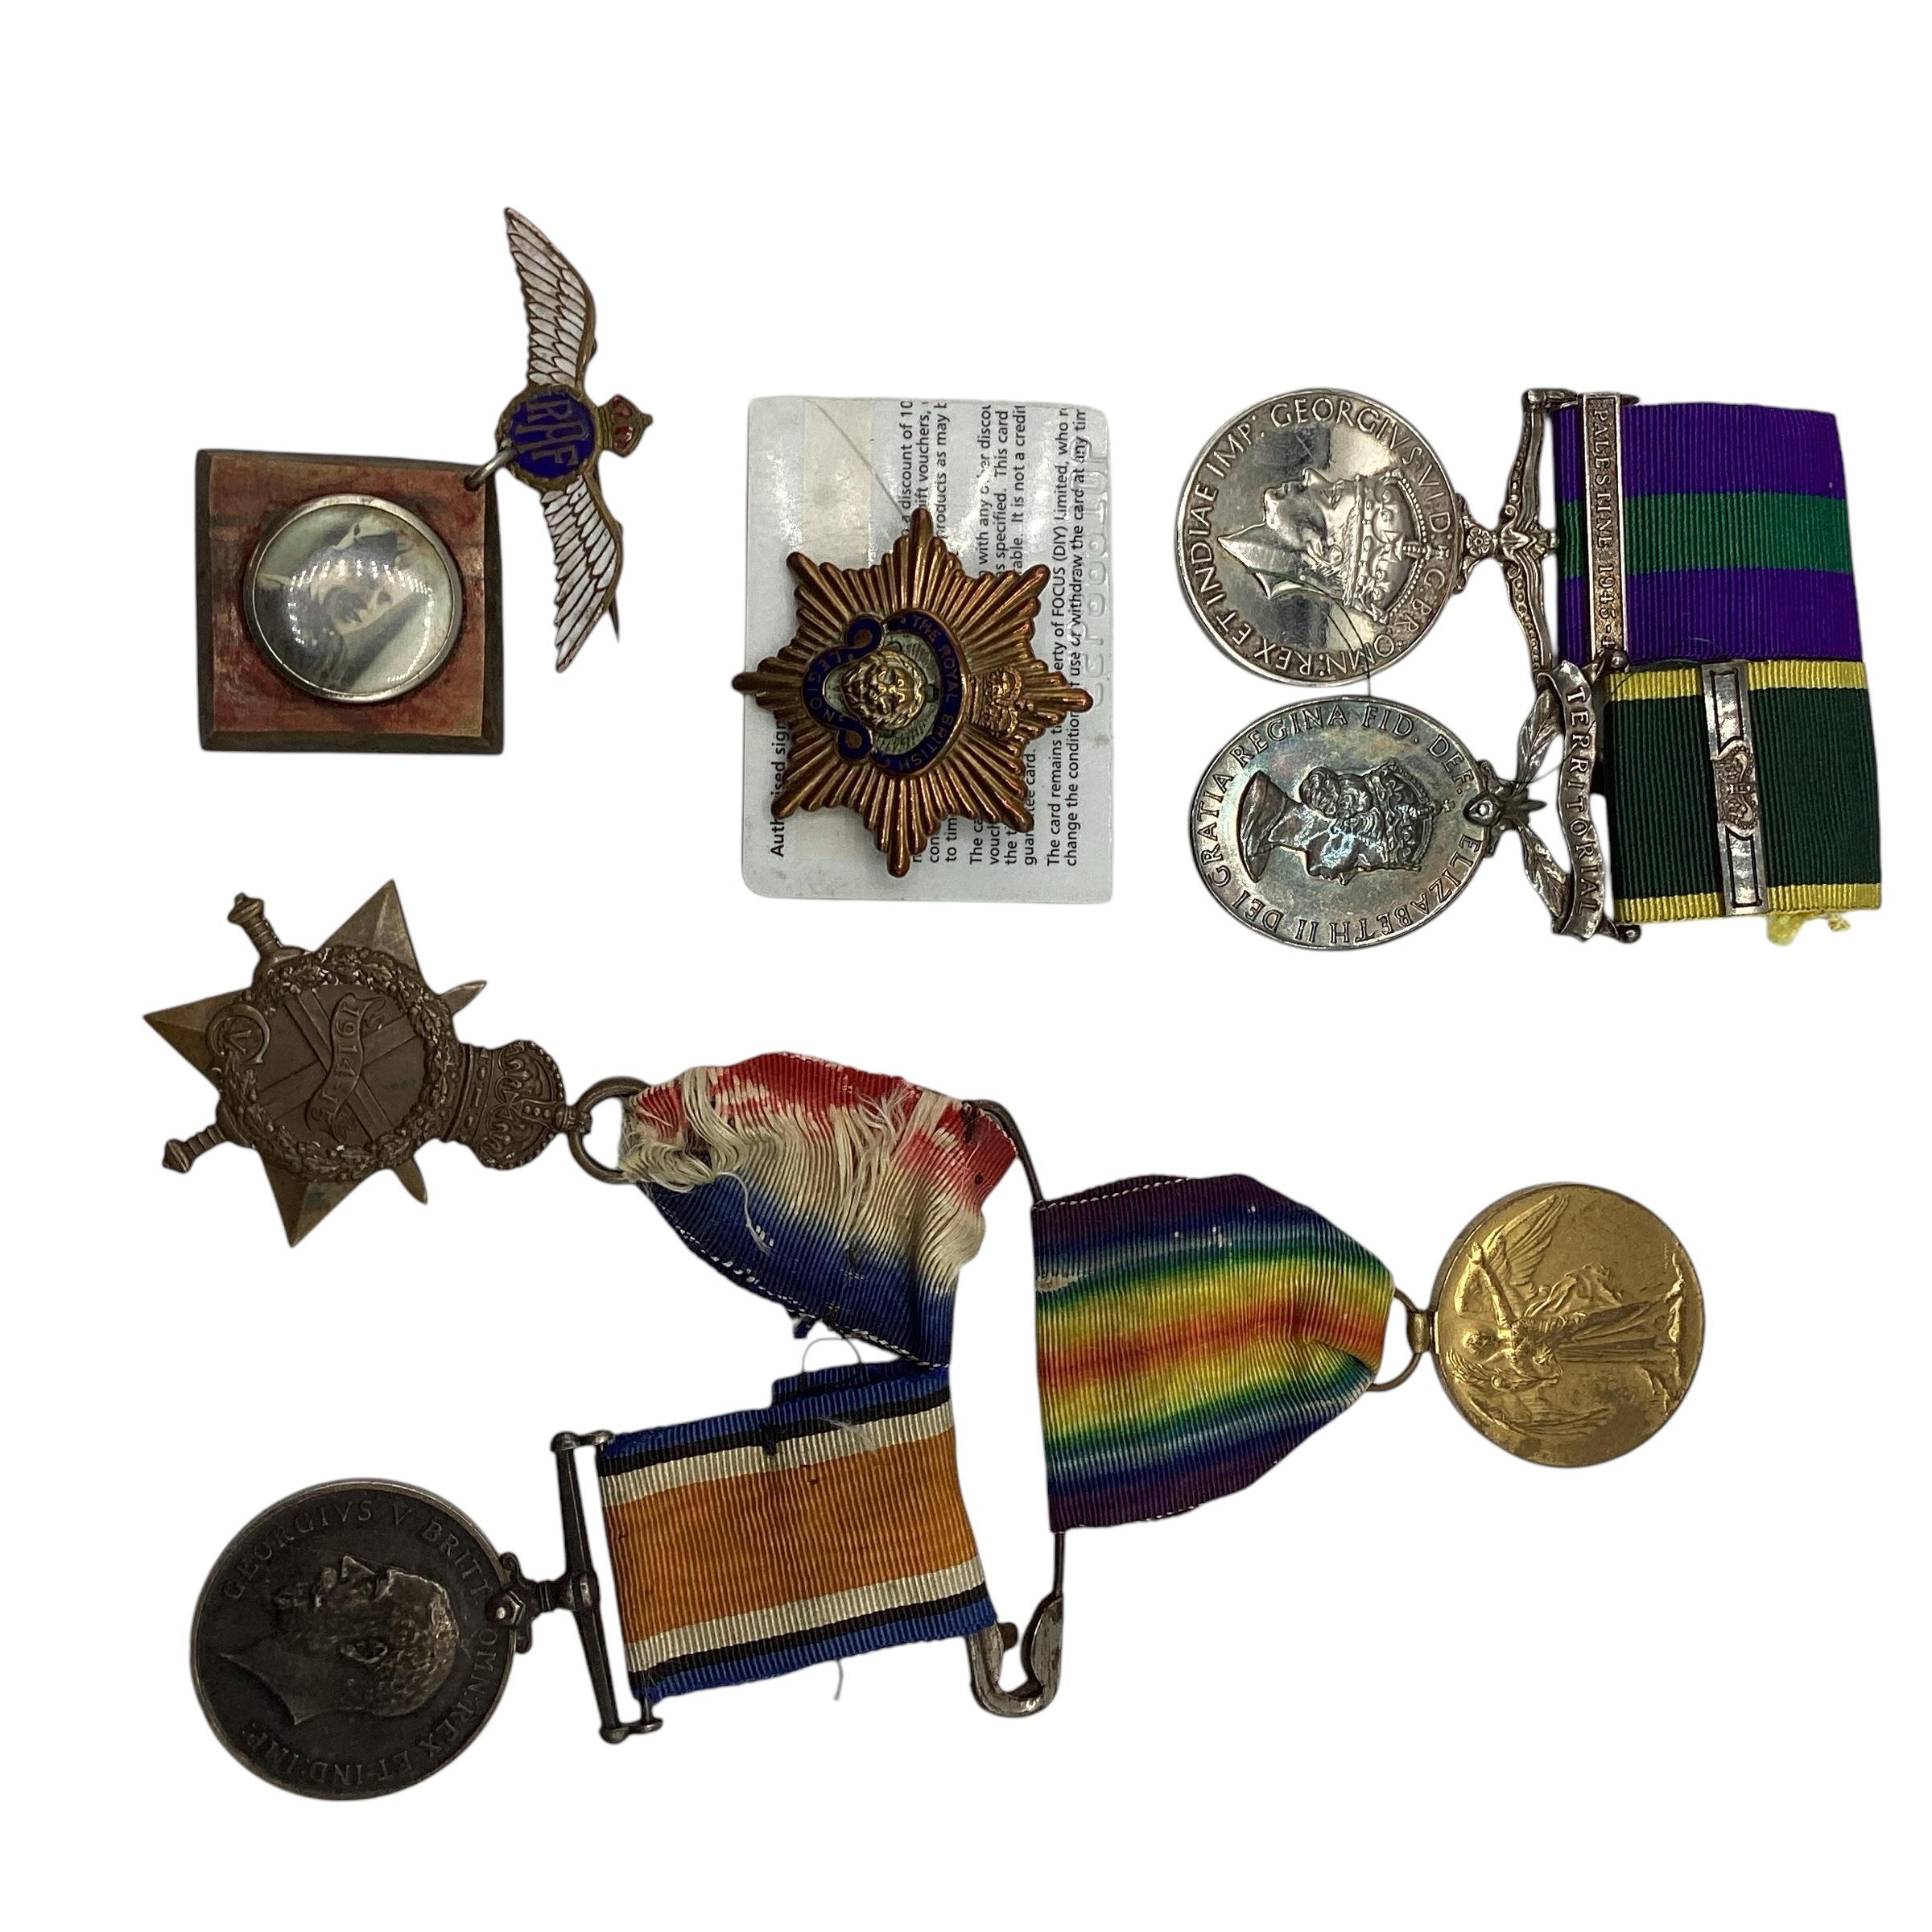 A World War I trio of medals to PNR M.Whale Royal Engineers together with medal group 'General